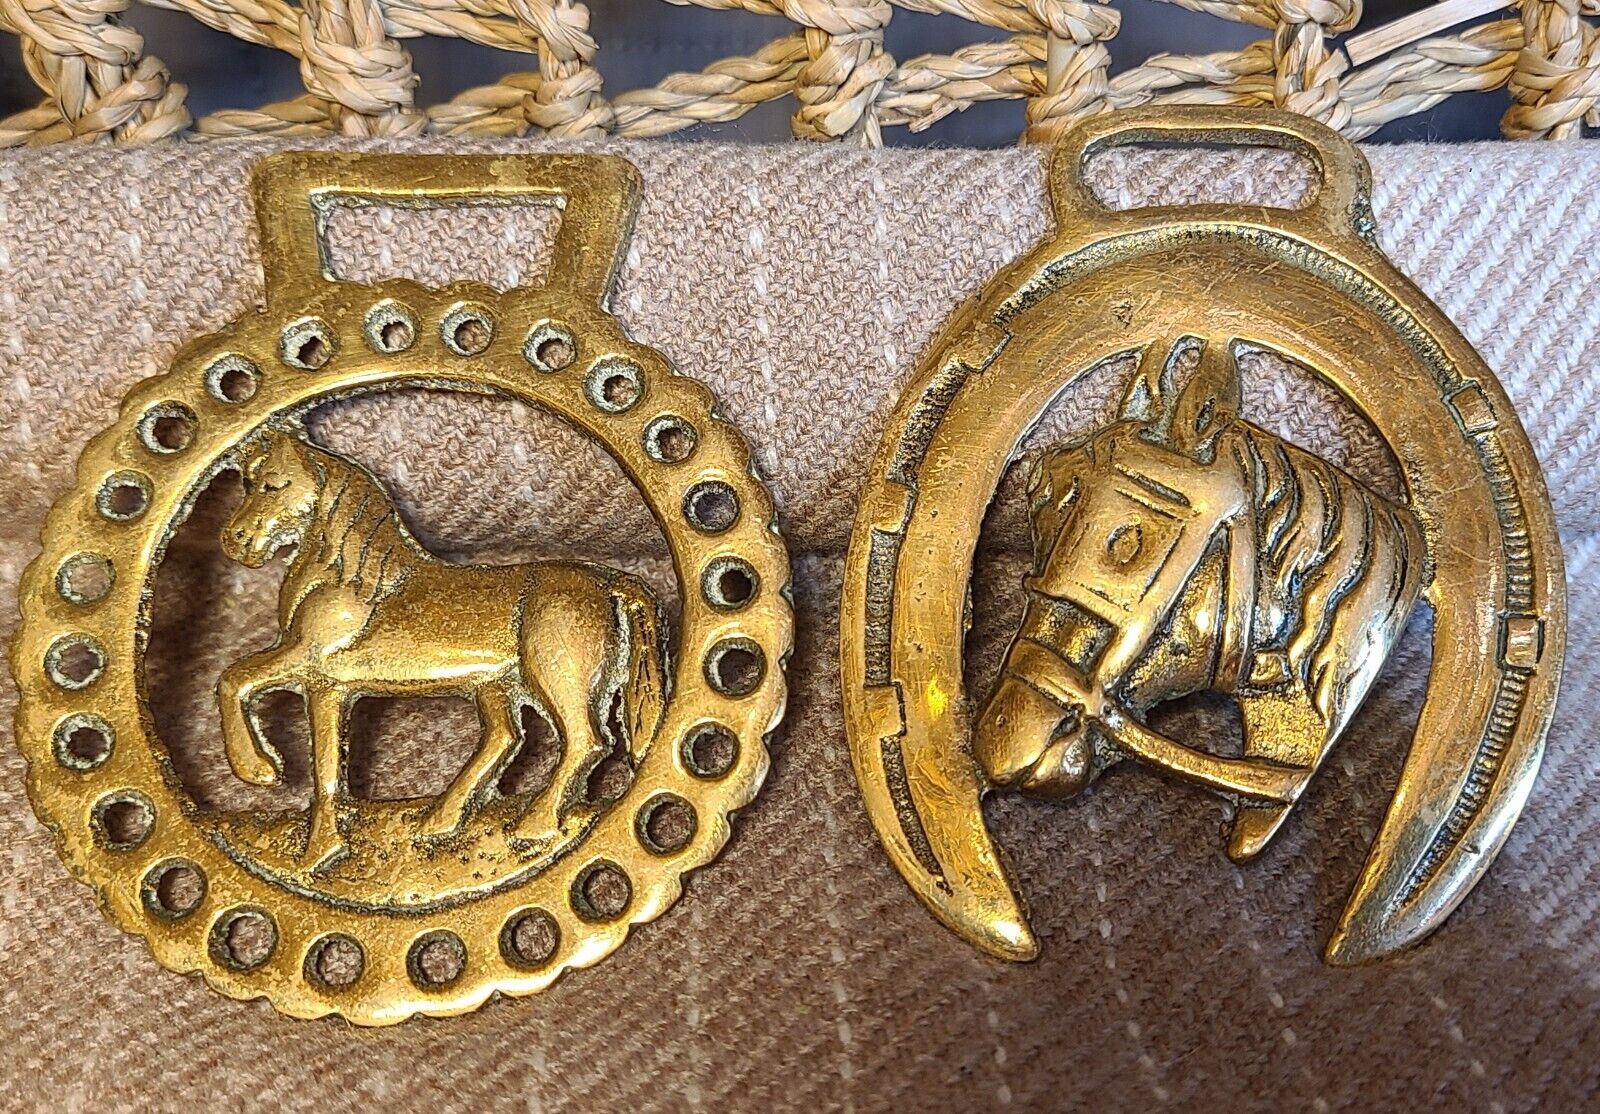 2 Vintage Brass Horse Medallions Head & Full Body Picture Decoration For Harness